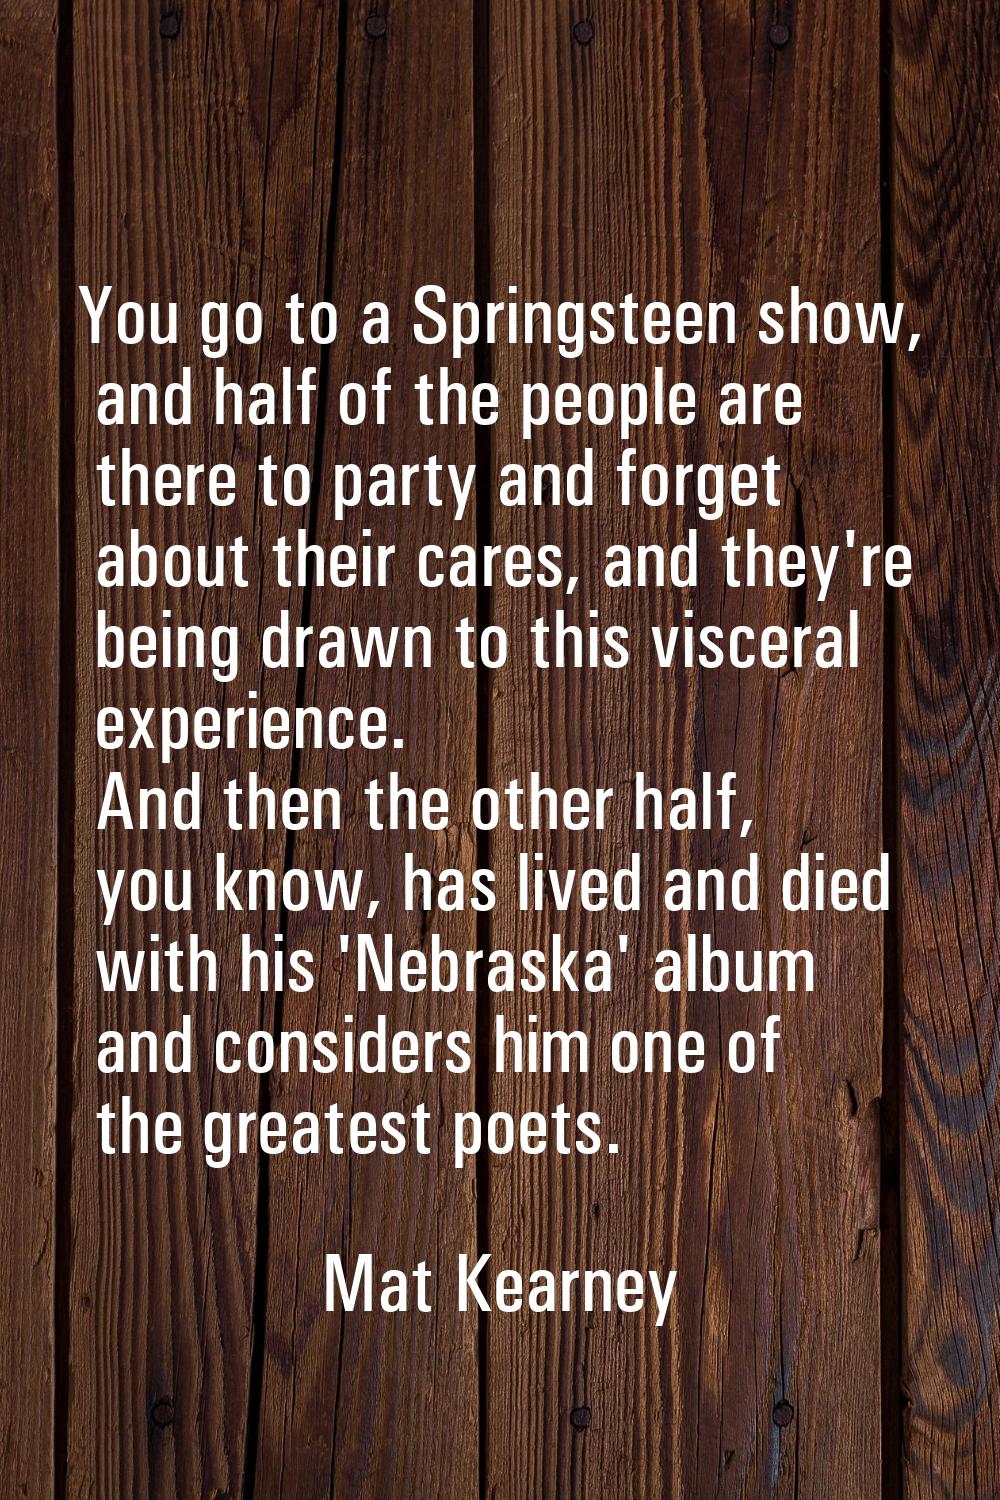 You go to a Springsteen show, and half of the people are there to party and forget about their care